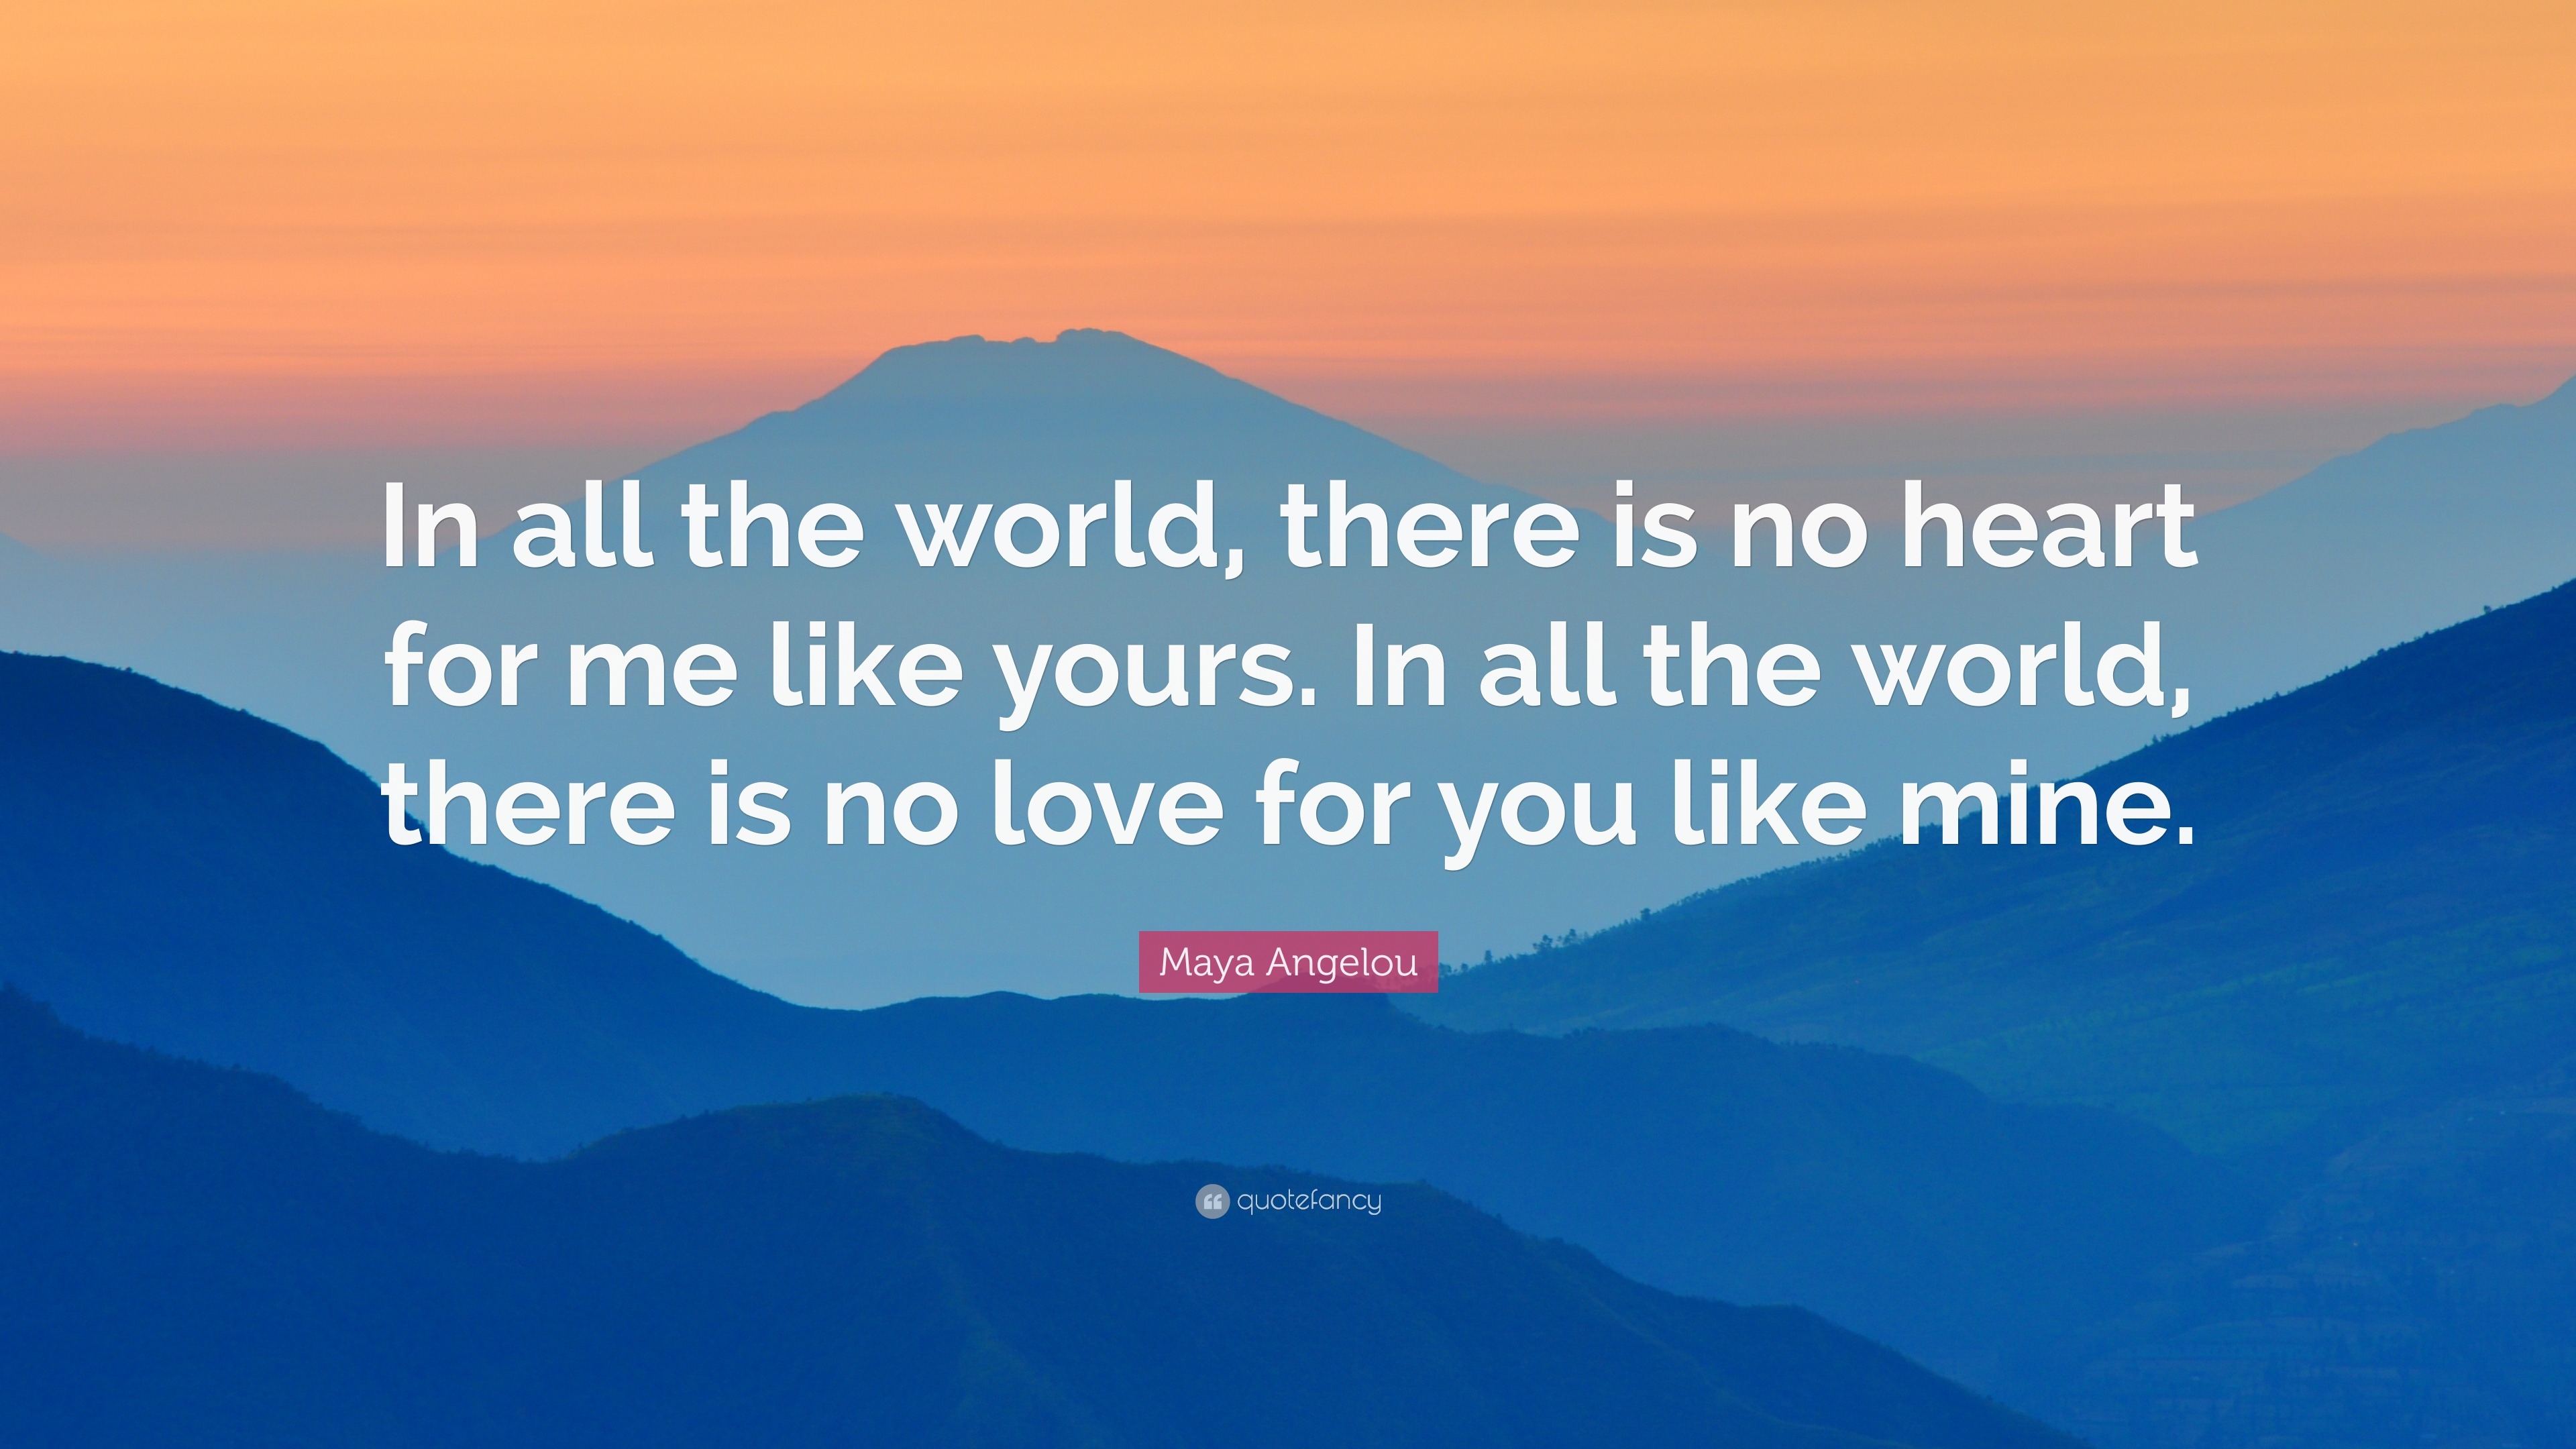 Maya Angelou Quote “In all the world there is no heart for me